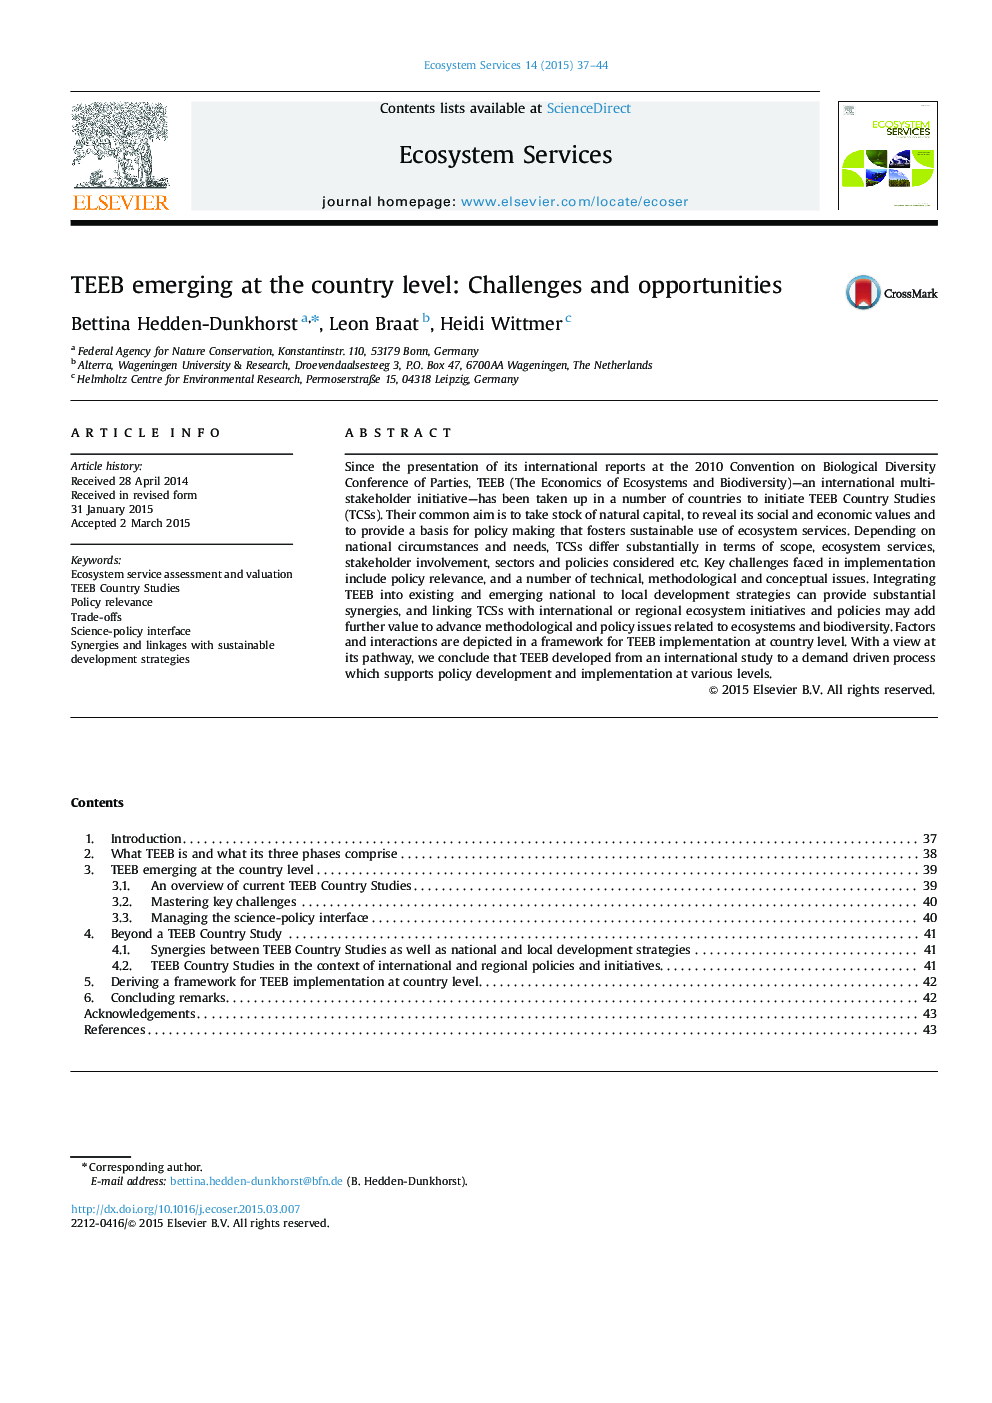 TEEB emerging at the country level: Challenges and opportunities